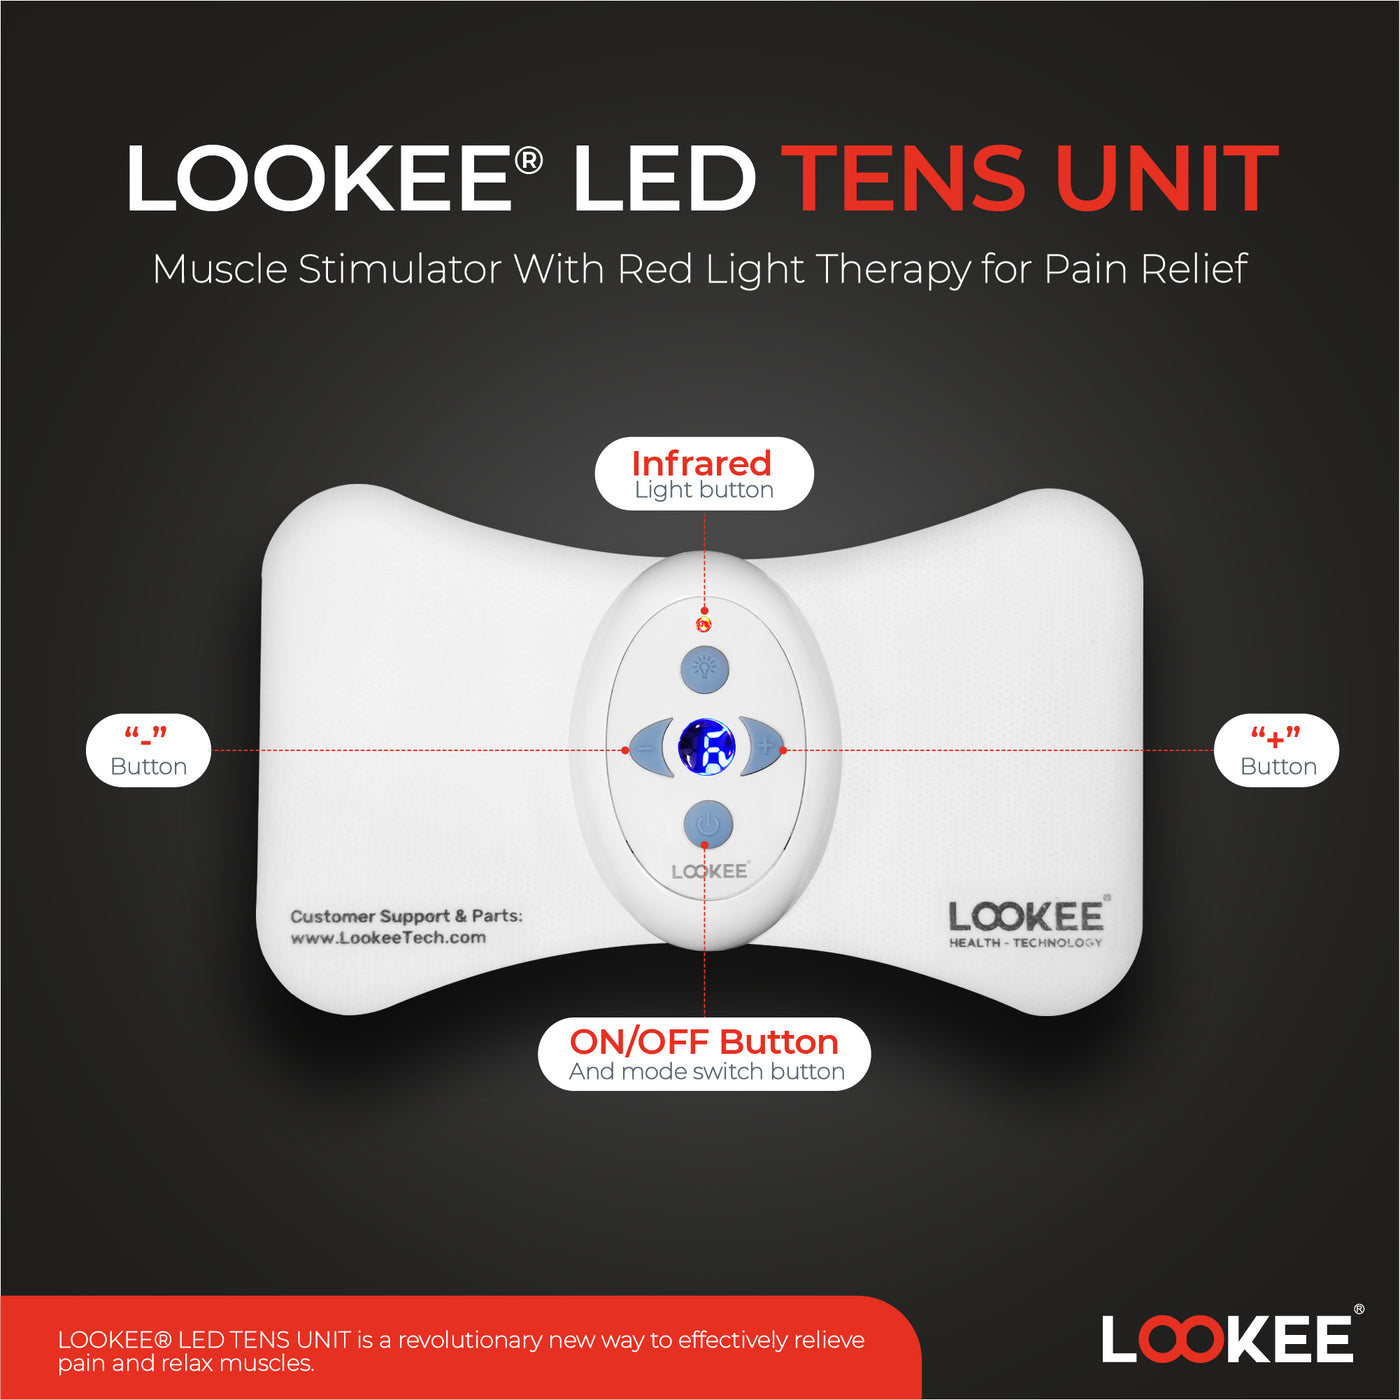 TENS Machine - Uses for pain Treatment and relief, TENS Units available